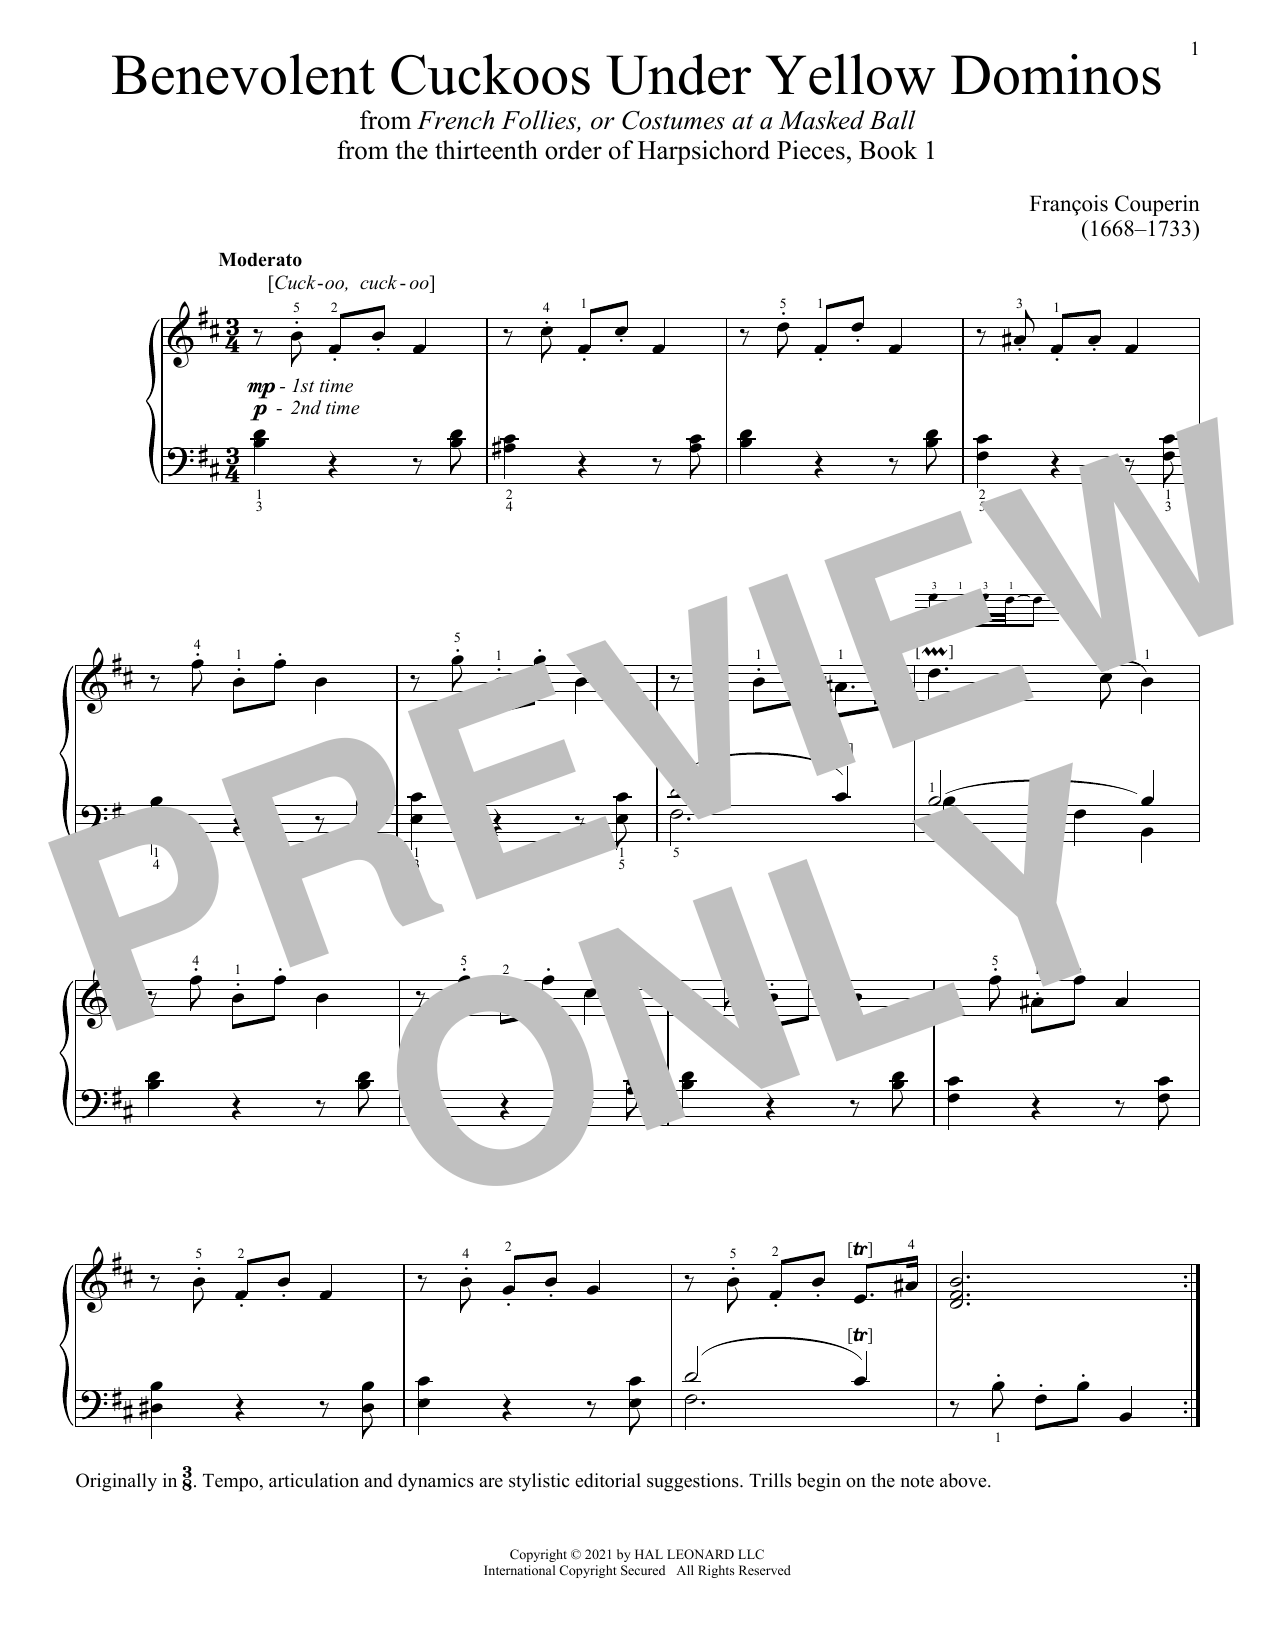 Download Francois Couperin Benevolent Cuckoos Under Yellow Dominos Sheet Music